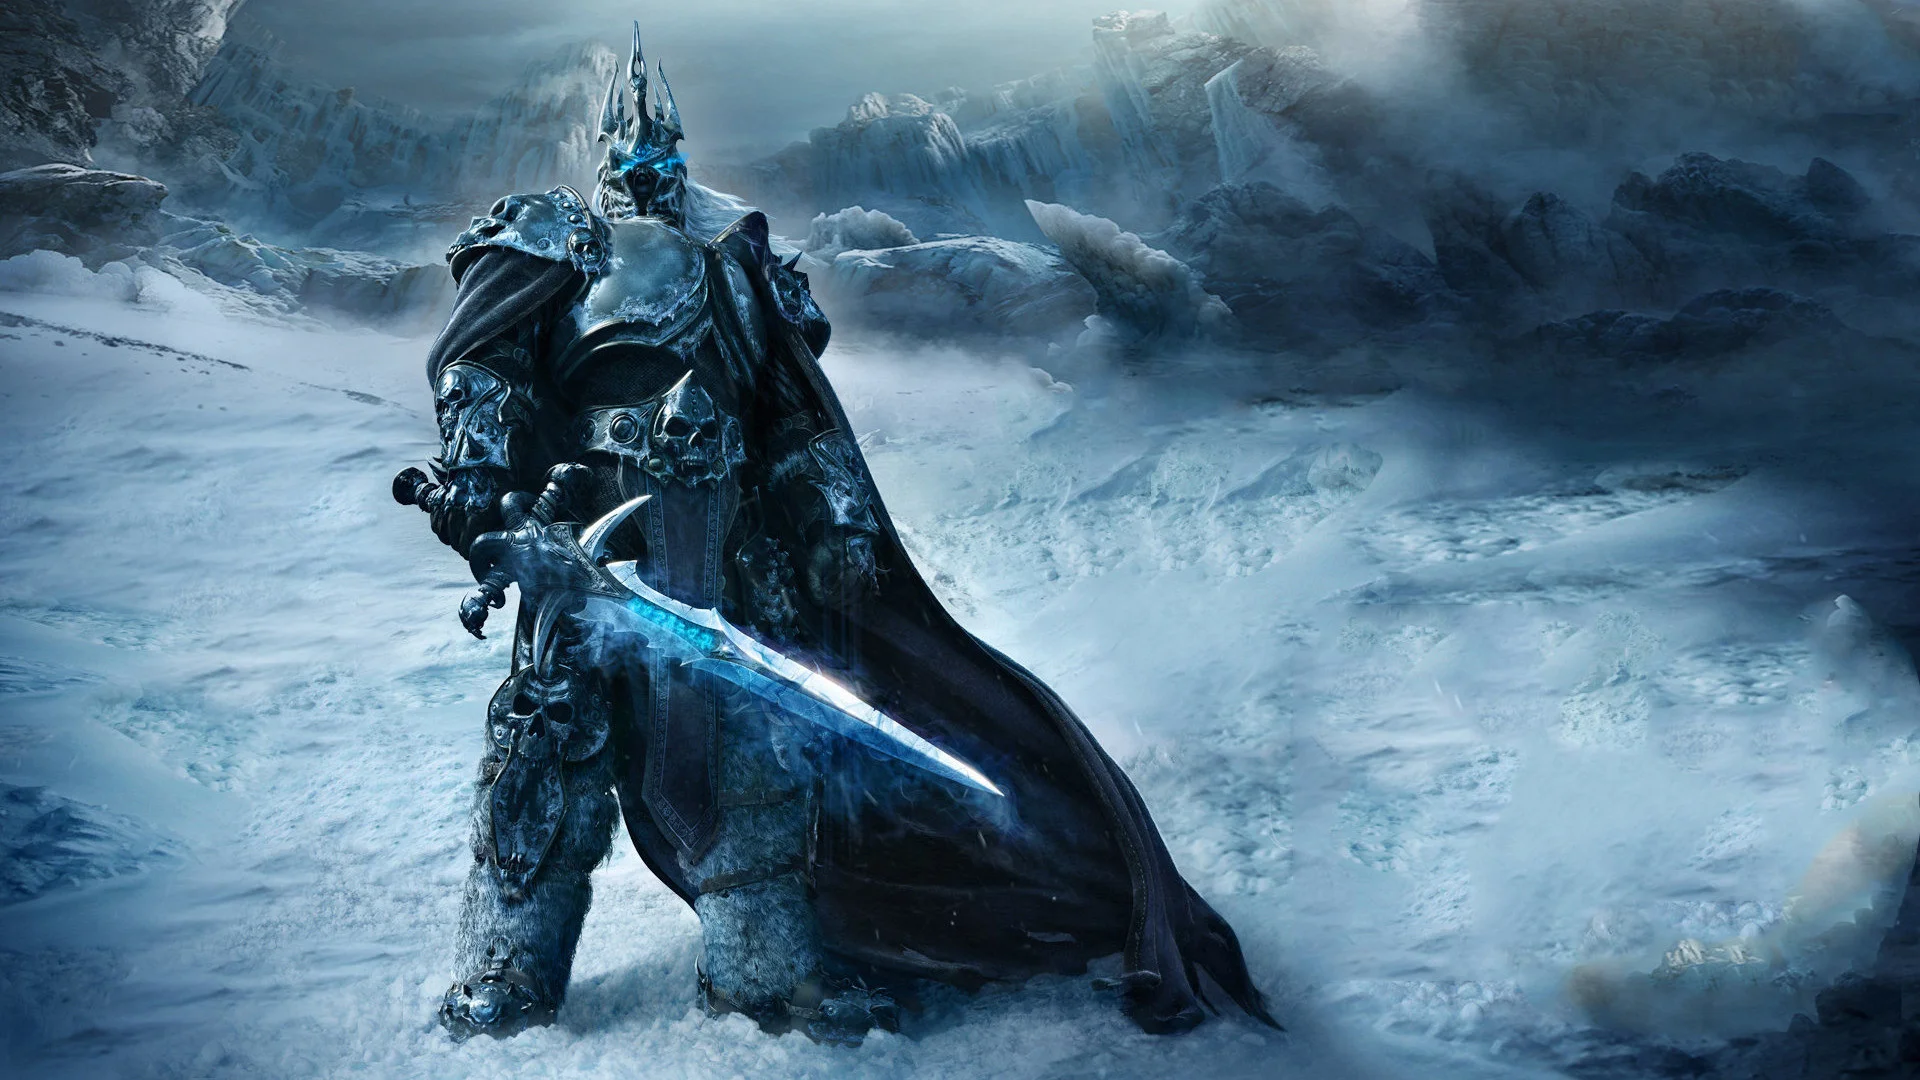 Game world of warcraft wrath of the lich king wallpaper